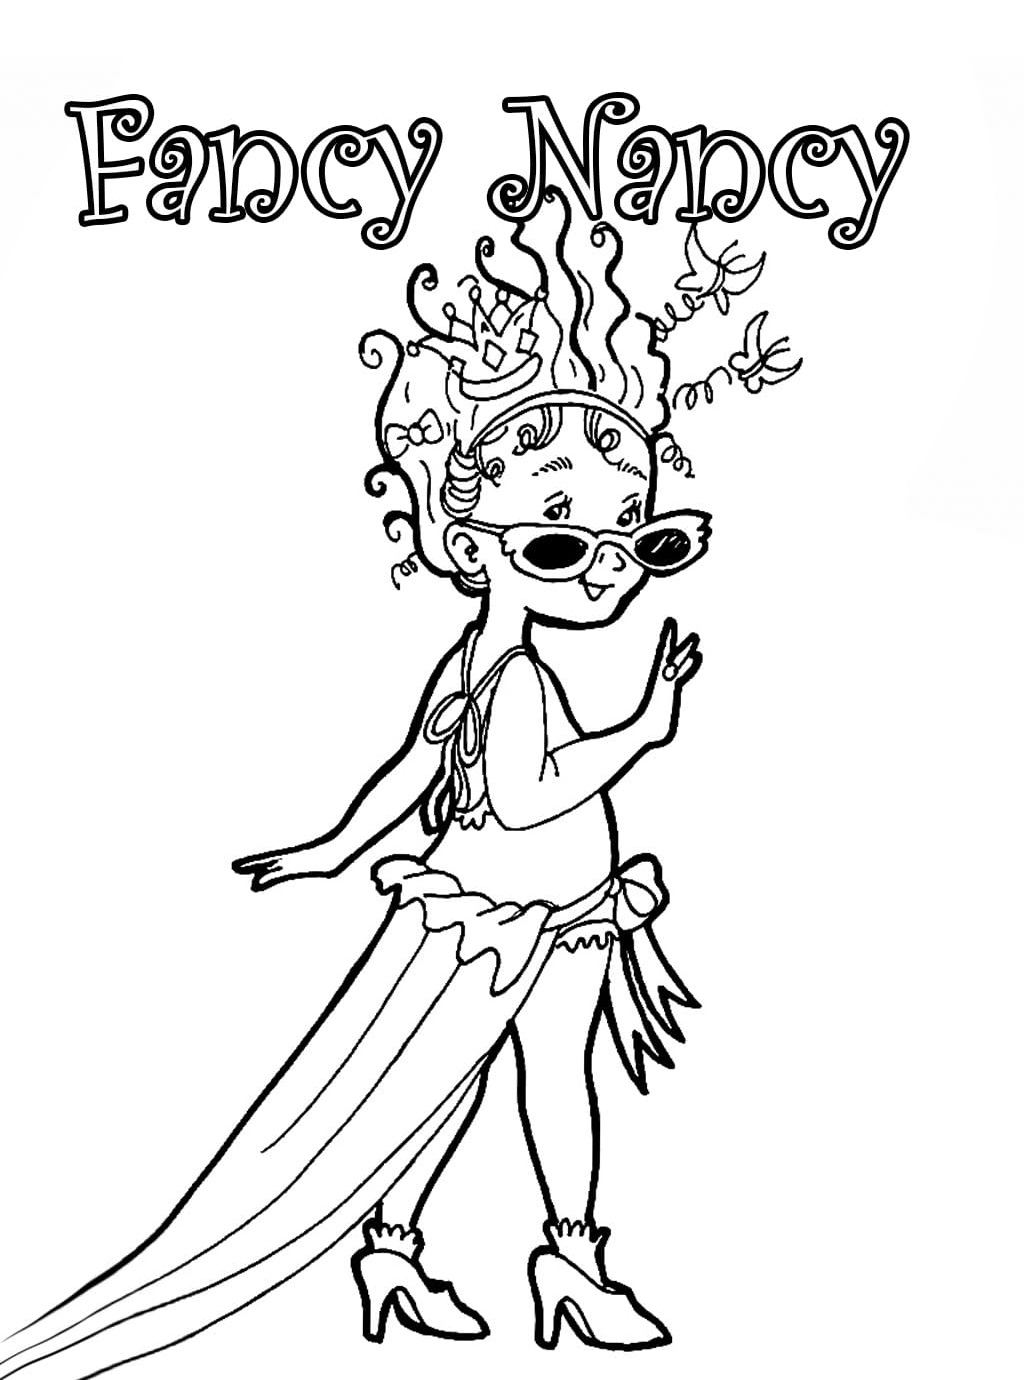 coloring pages fancy nancy and friend